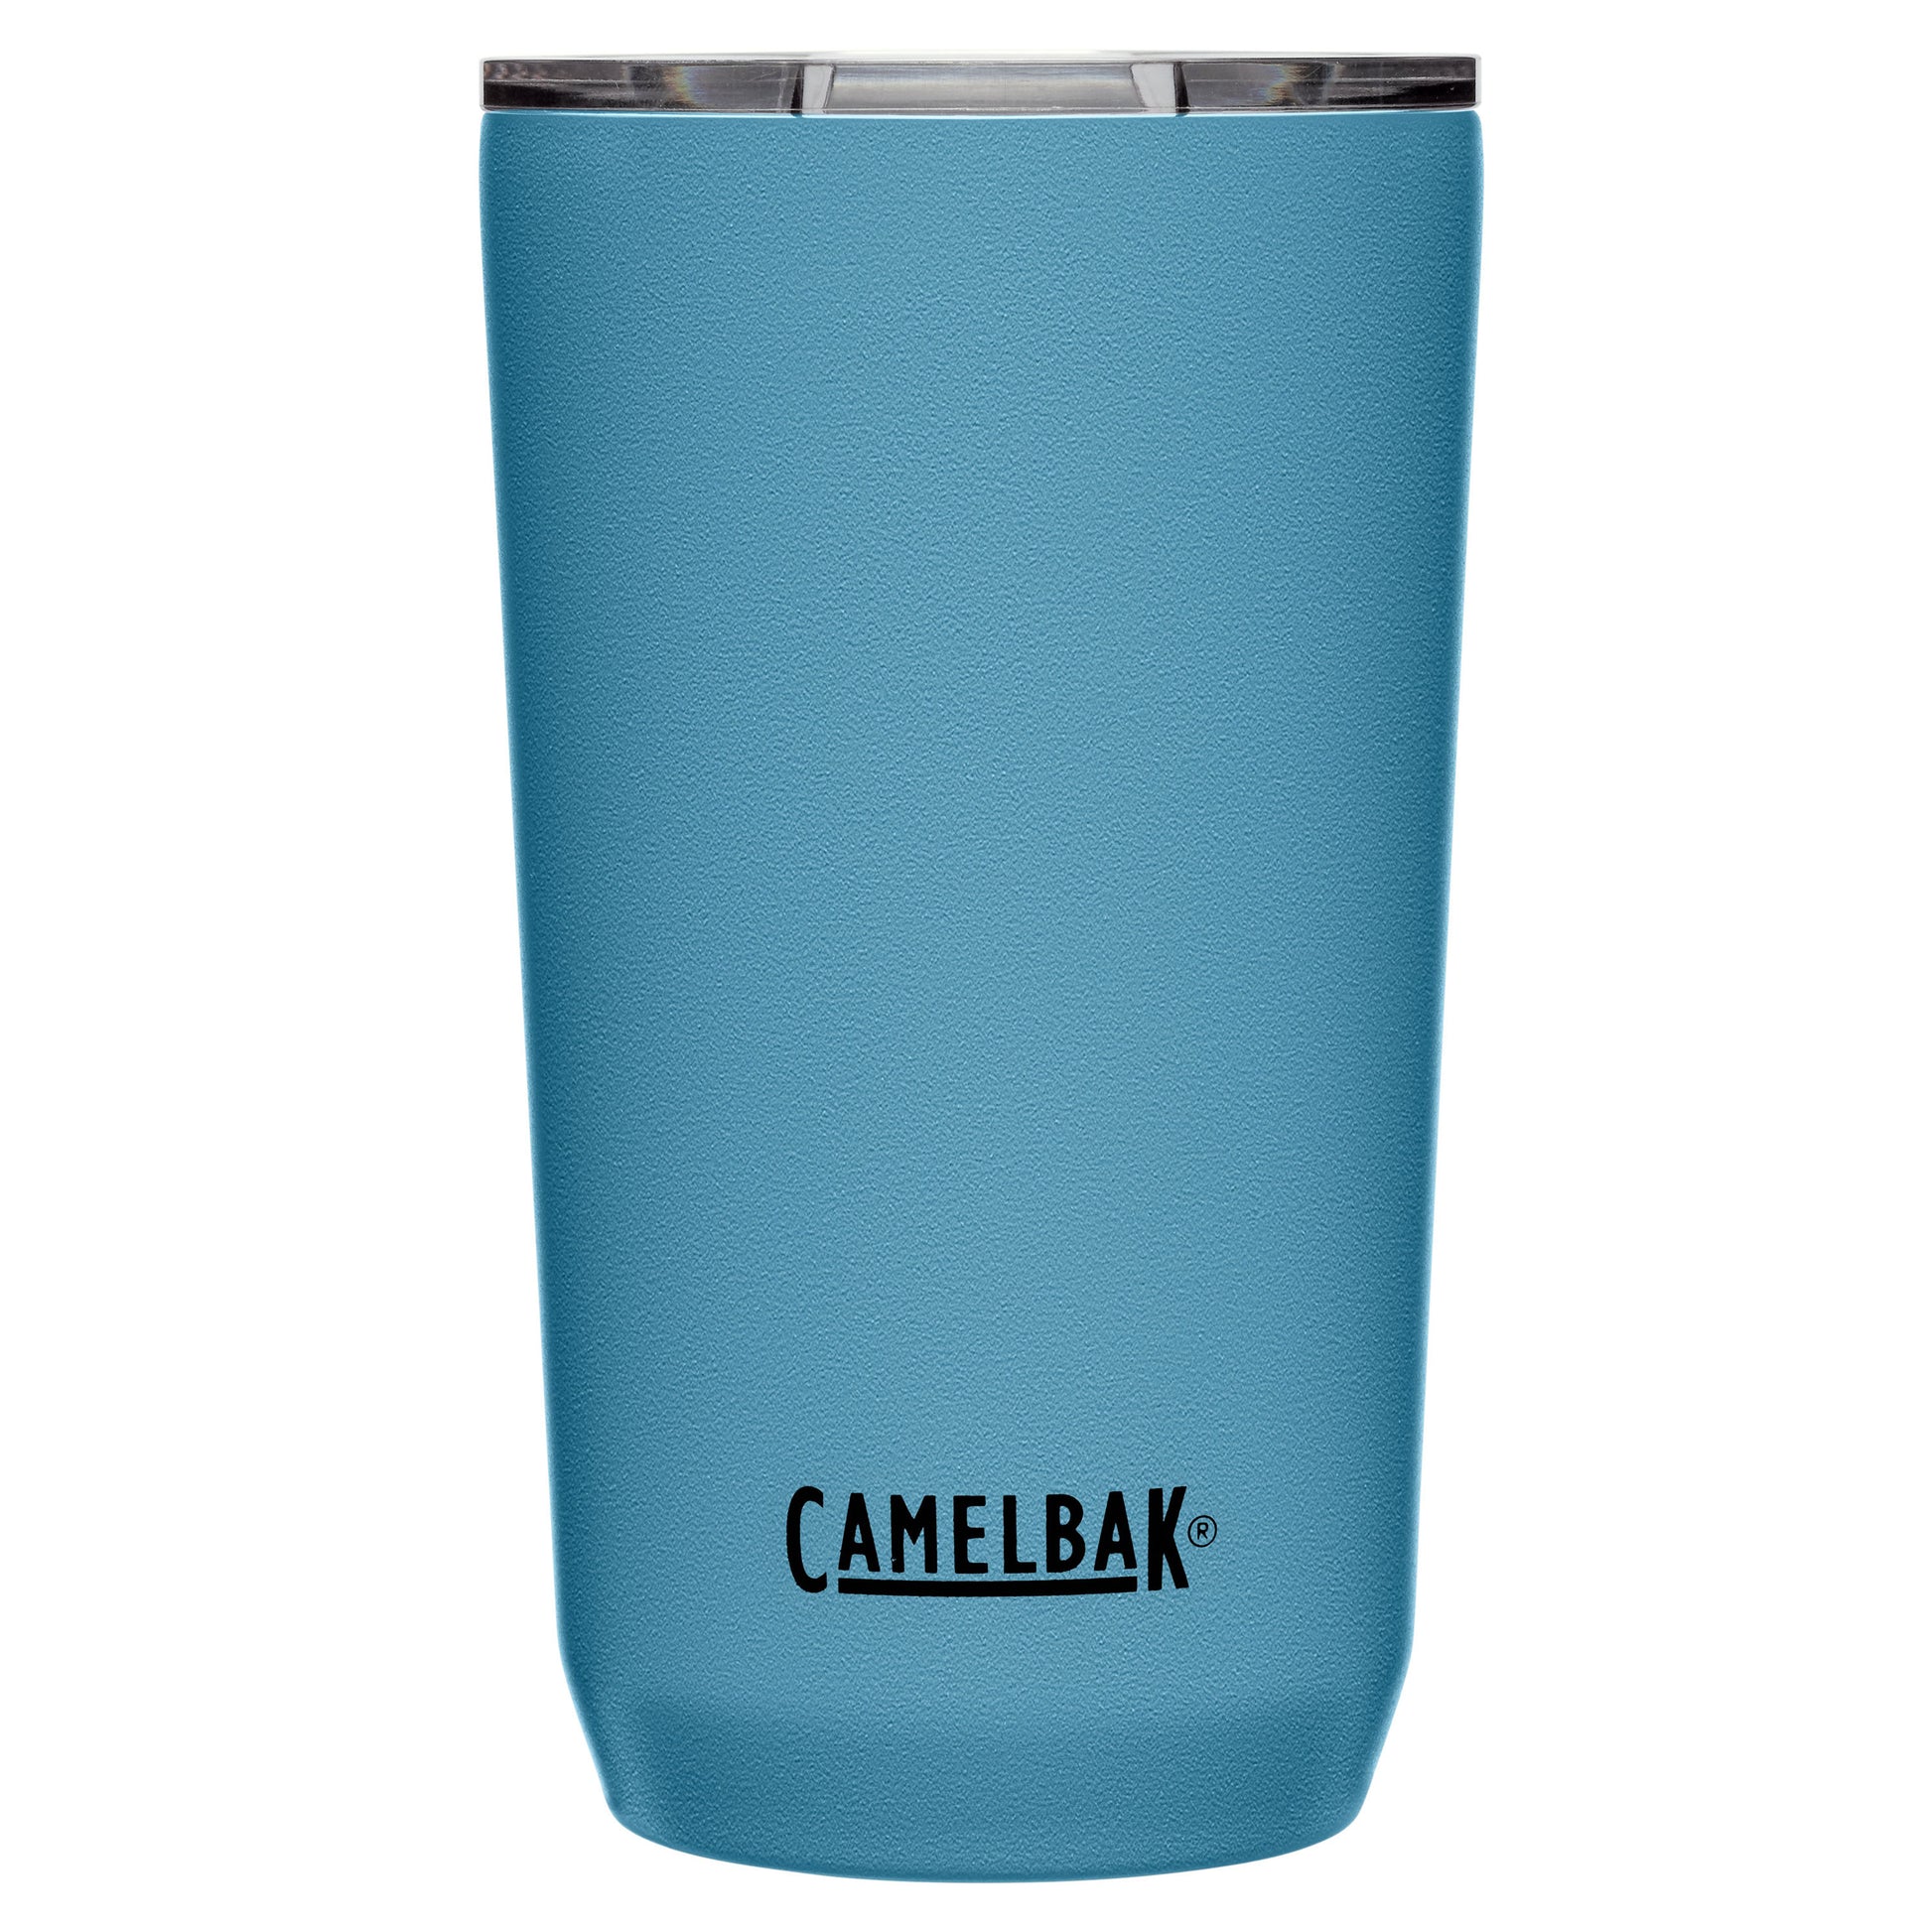 CamelBak Products Now Available At Whole Latte Love